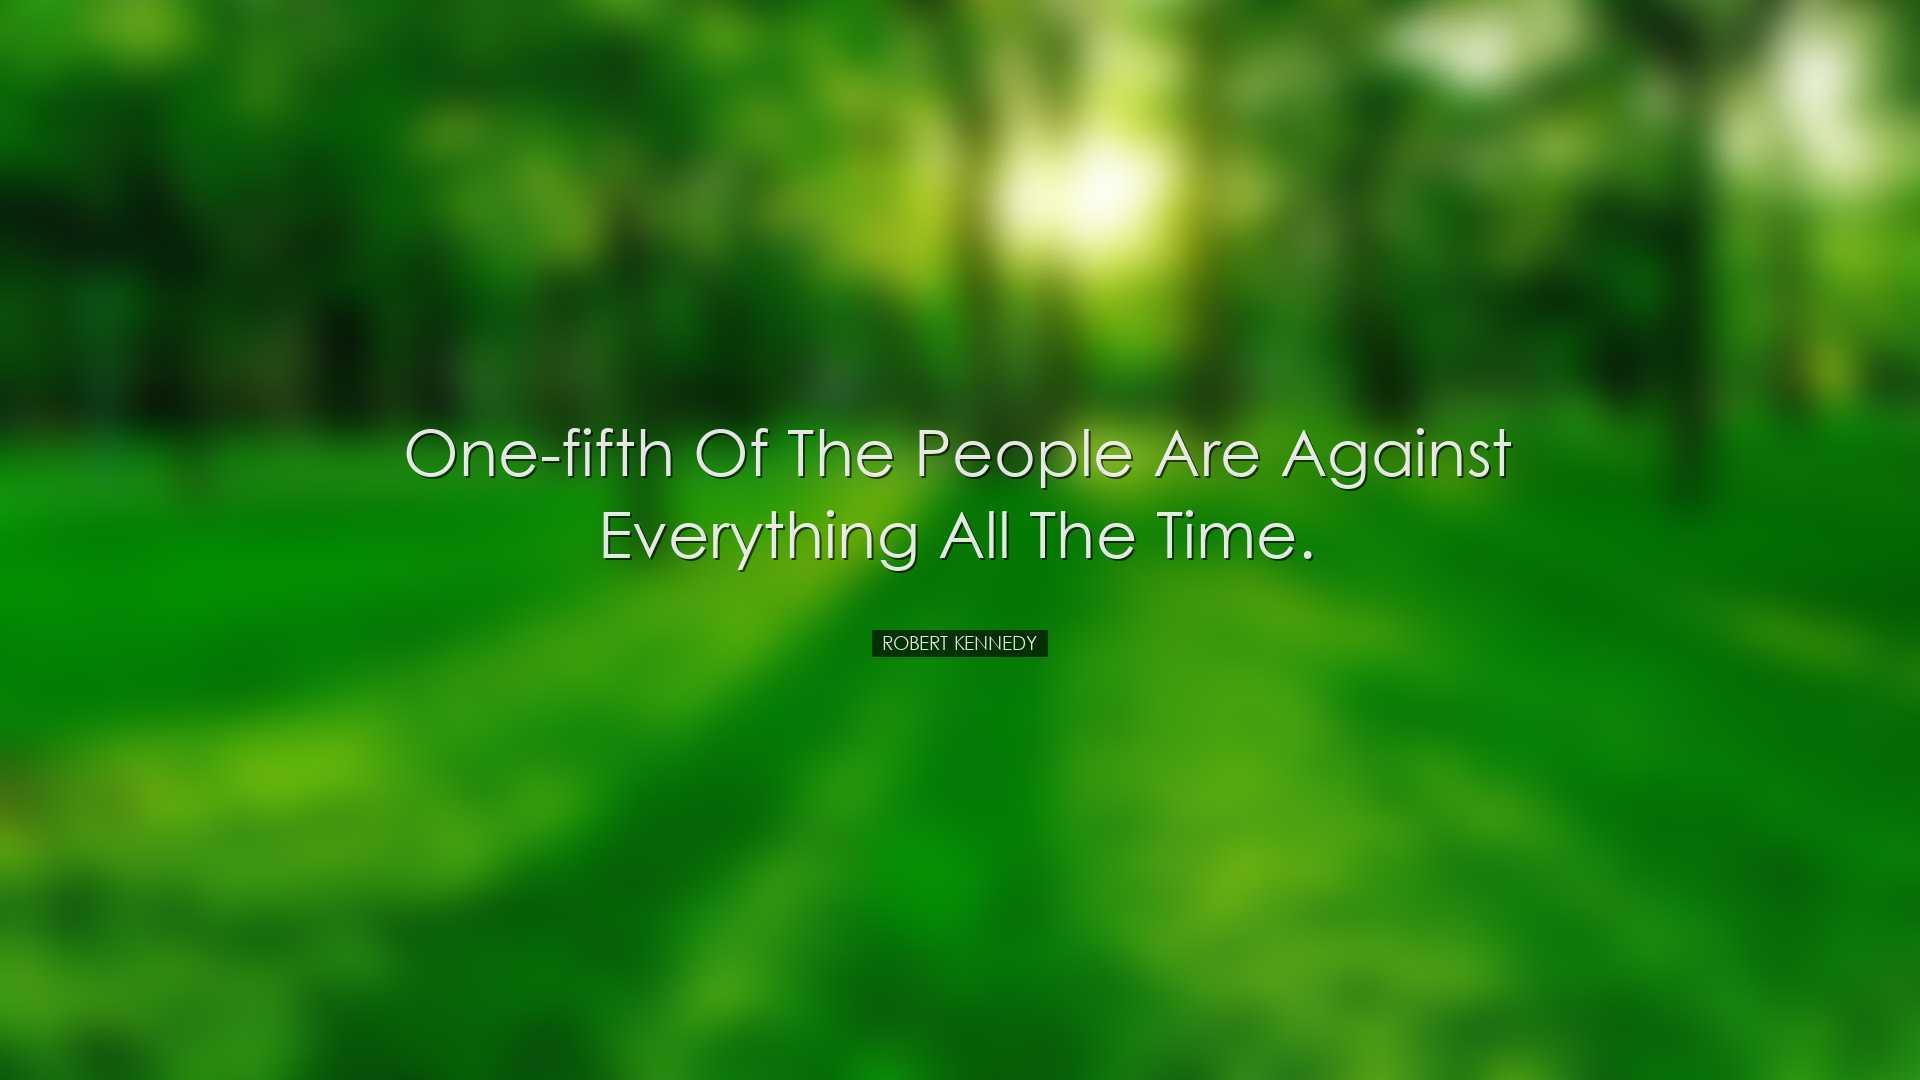 One-fifth of the people are against everything all the time. - Rob